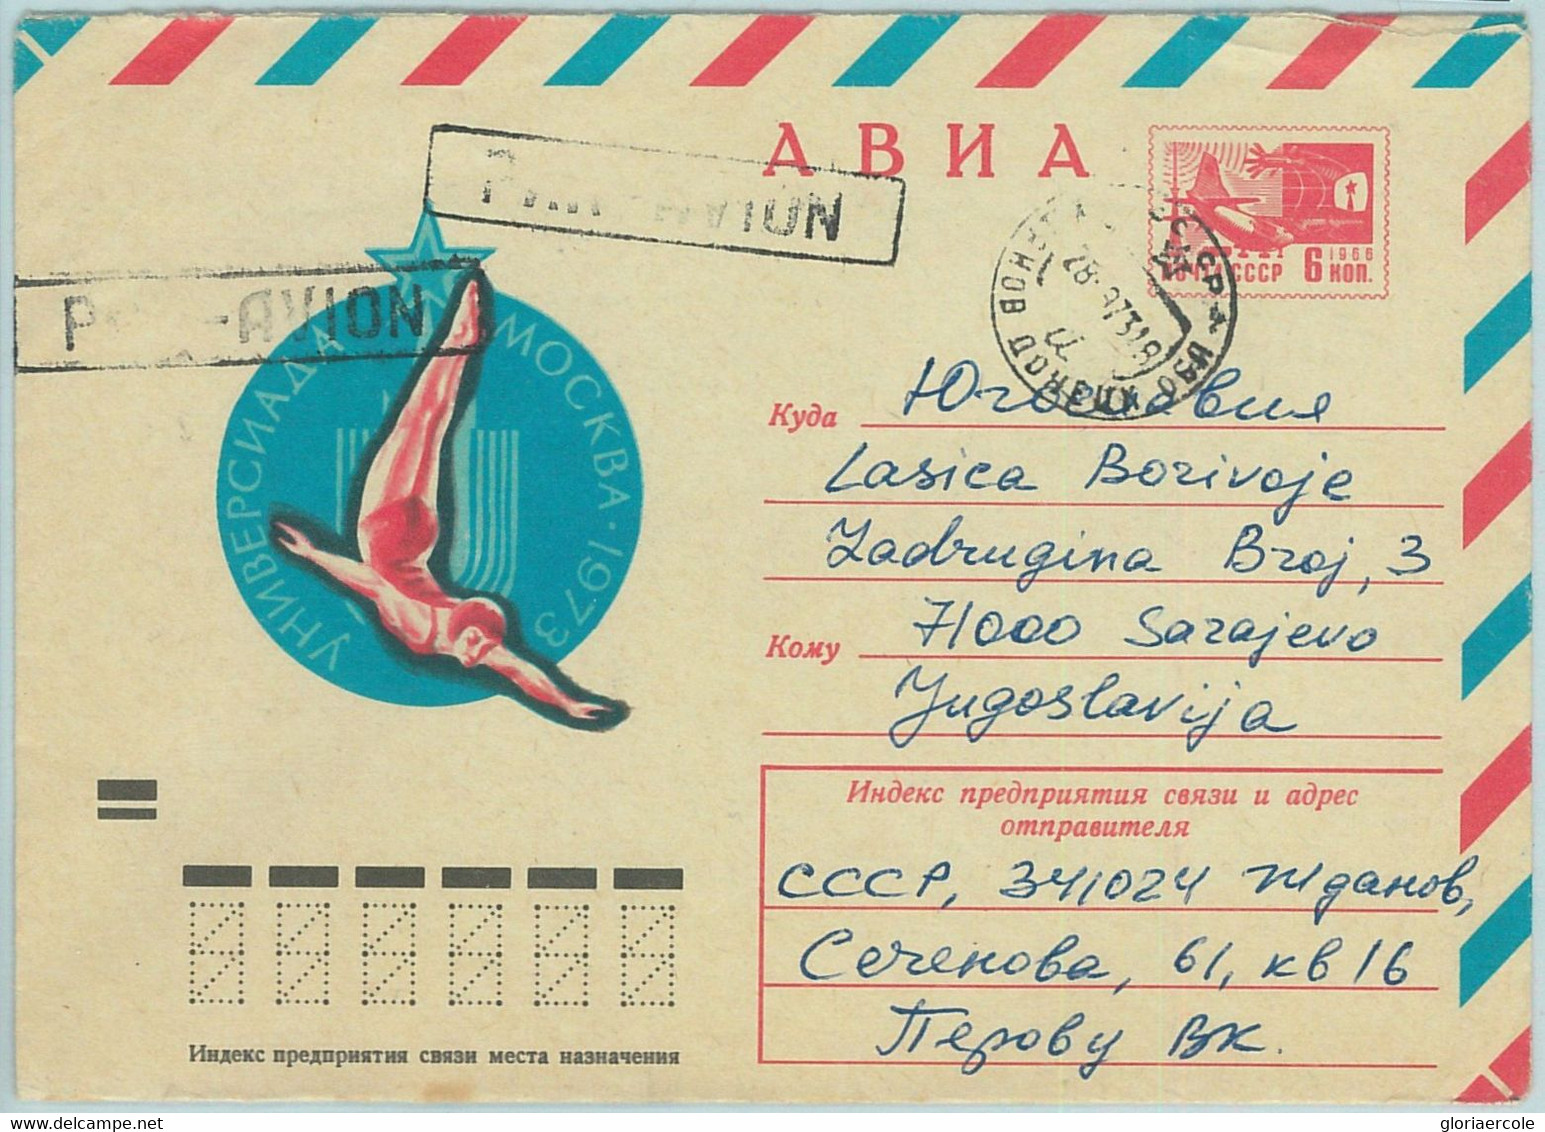 67800 - RUSSIA - POSTAL HISTORY - STATIONERY COVER - 1973, Universiade Games, Diving - Tauchen